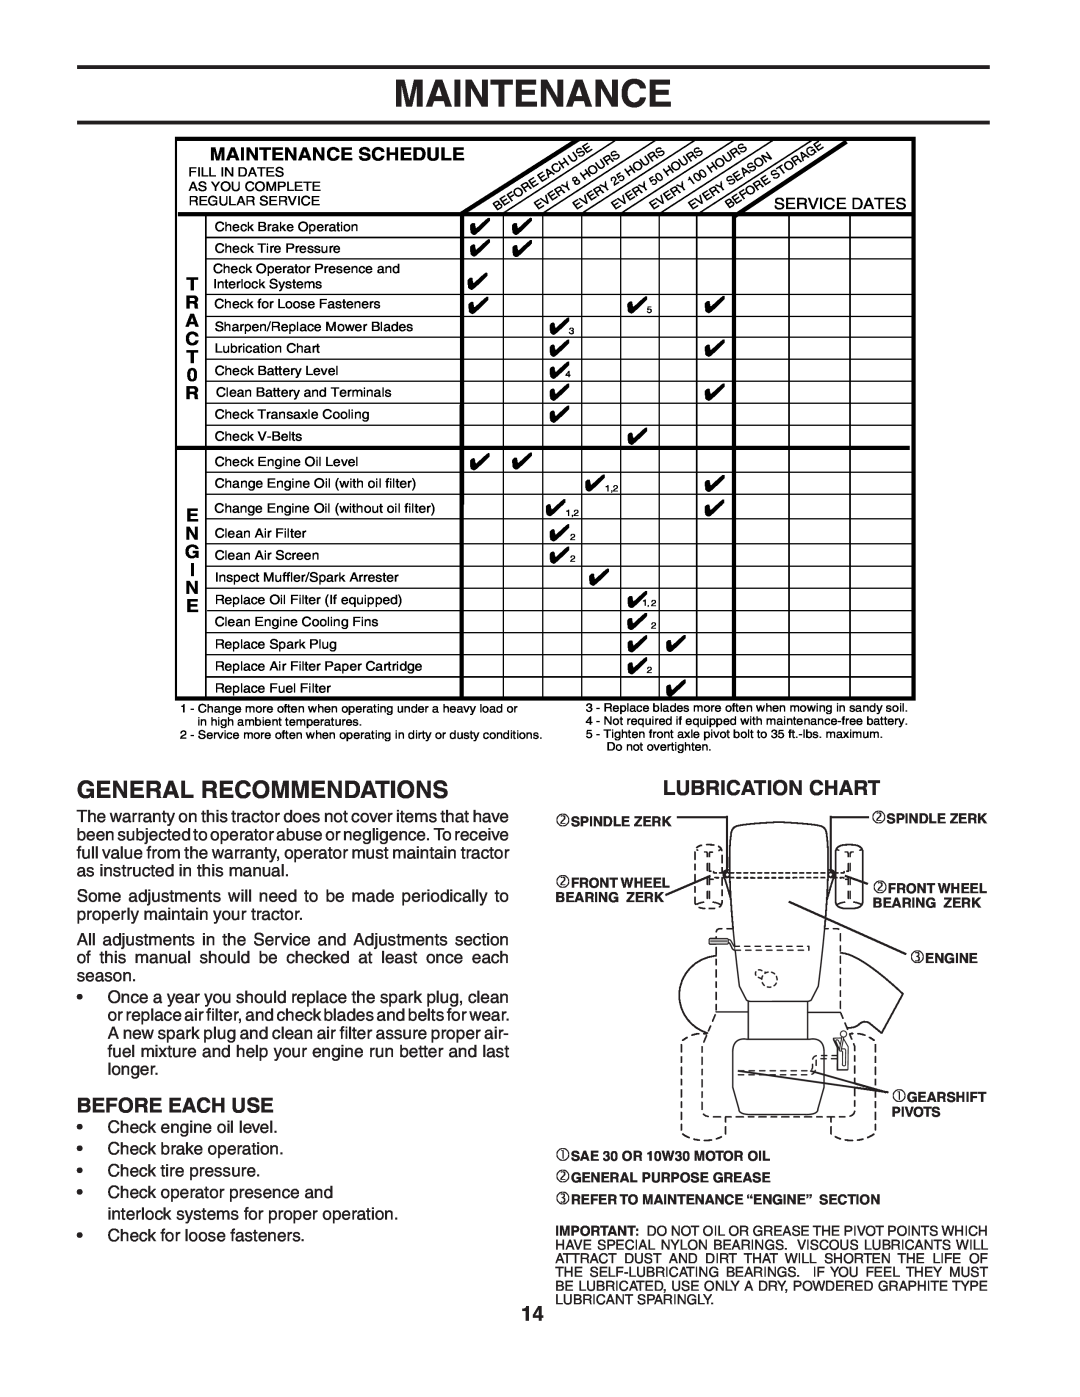 Poulan PO1742STA manual Maintenance, General Recommendations, Before Each Use, Lubrication Chart 